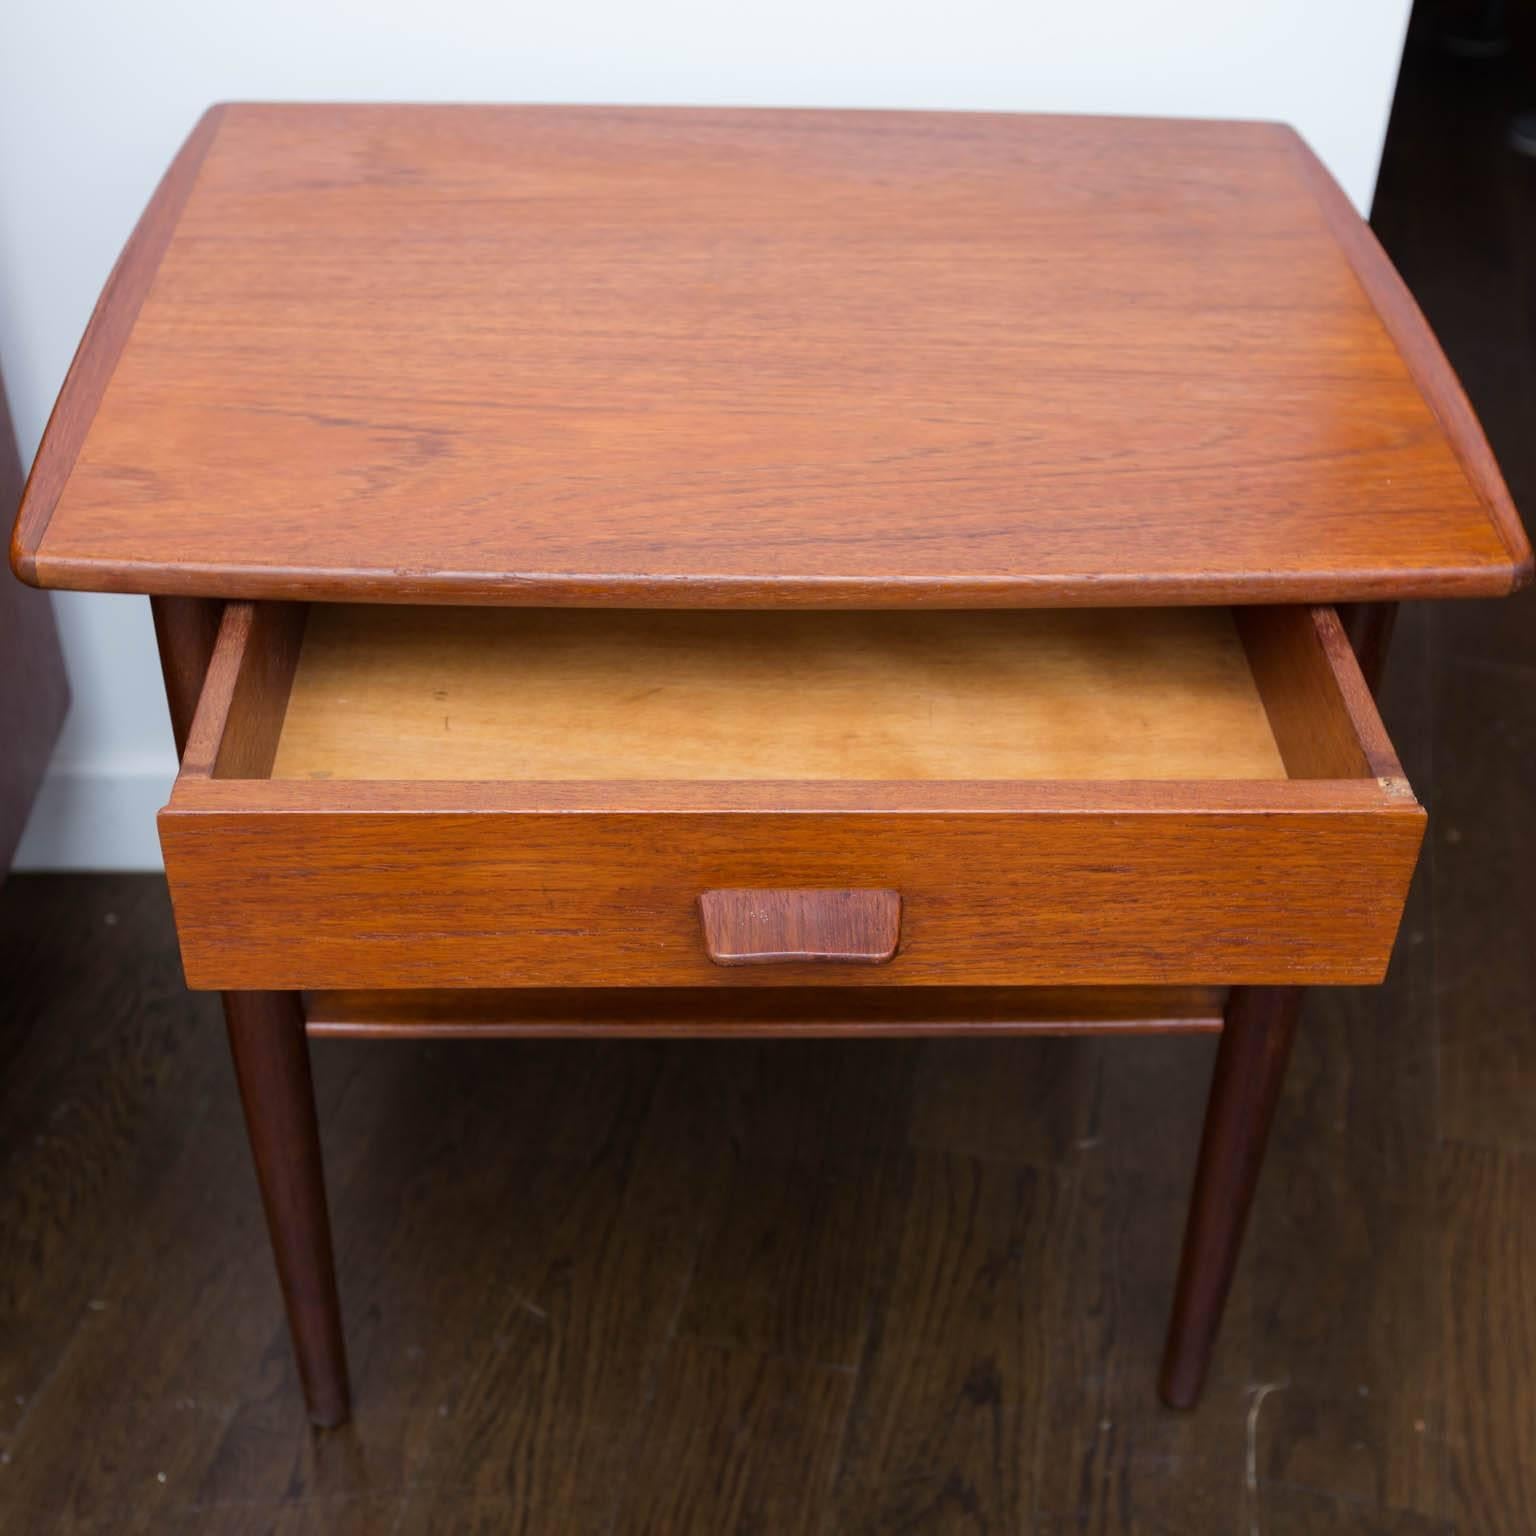 Clean teak side table or nightstand with angled teak drawer pull identical to those featured on Volther's pieces.